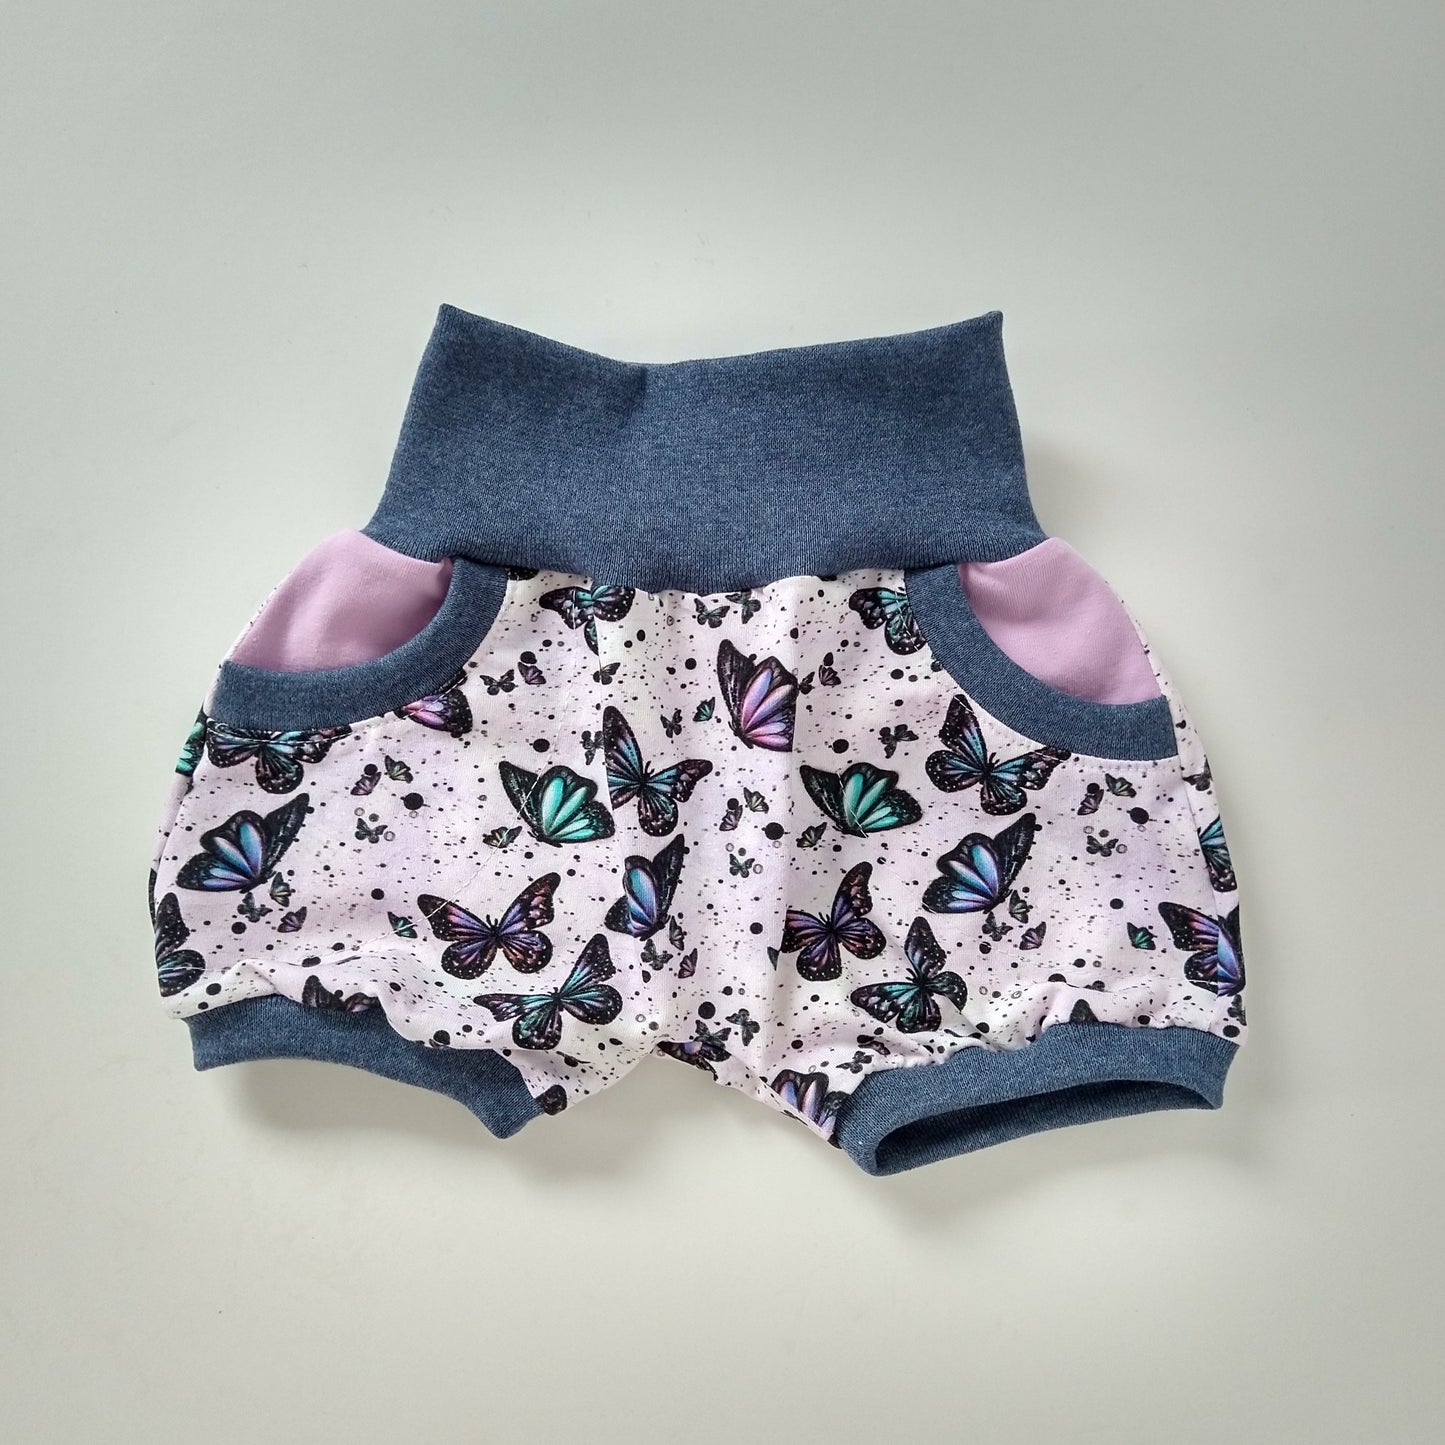 Baby summer shorts, size EUR 74 cm / US 7-9 months, purple butterfly mix and match (Handmade in Canada)